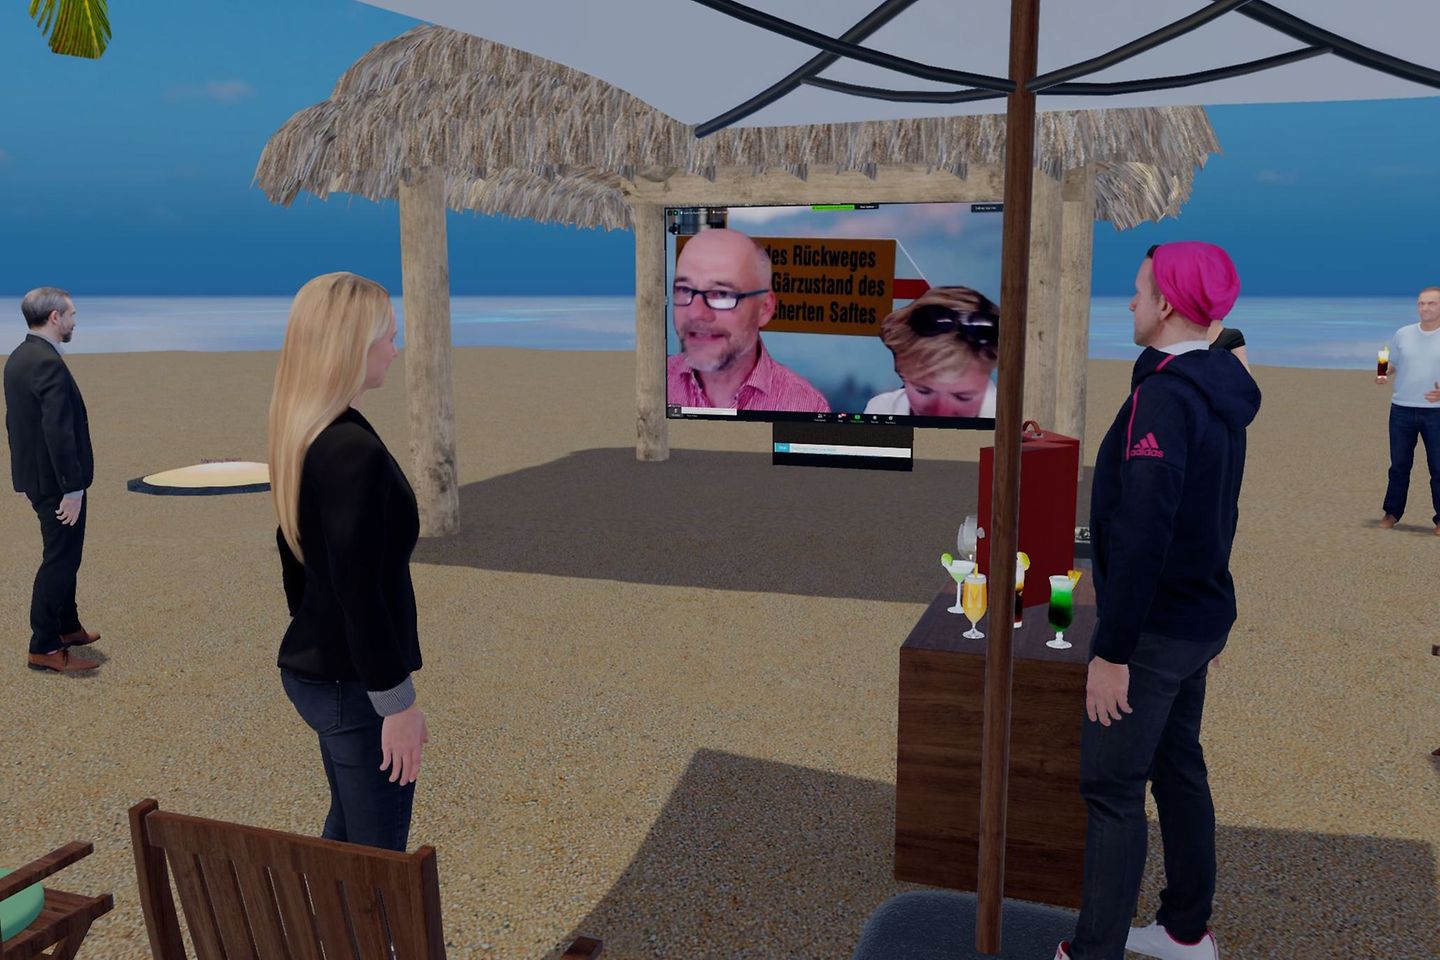 Video conference on a virtual beach, there is a screen with two people on it and two others standing at the beach